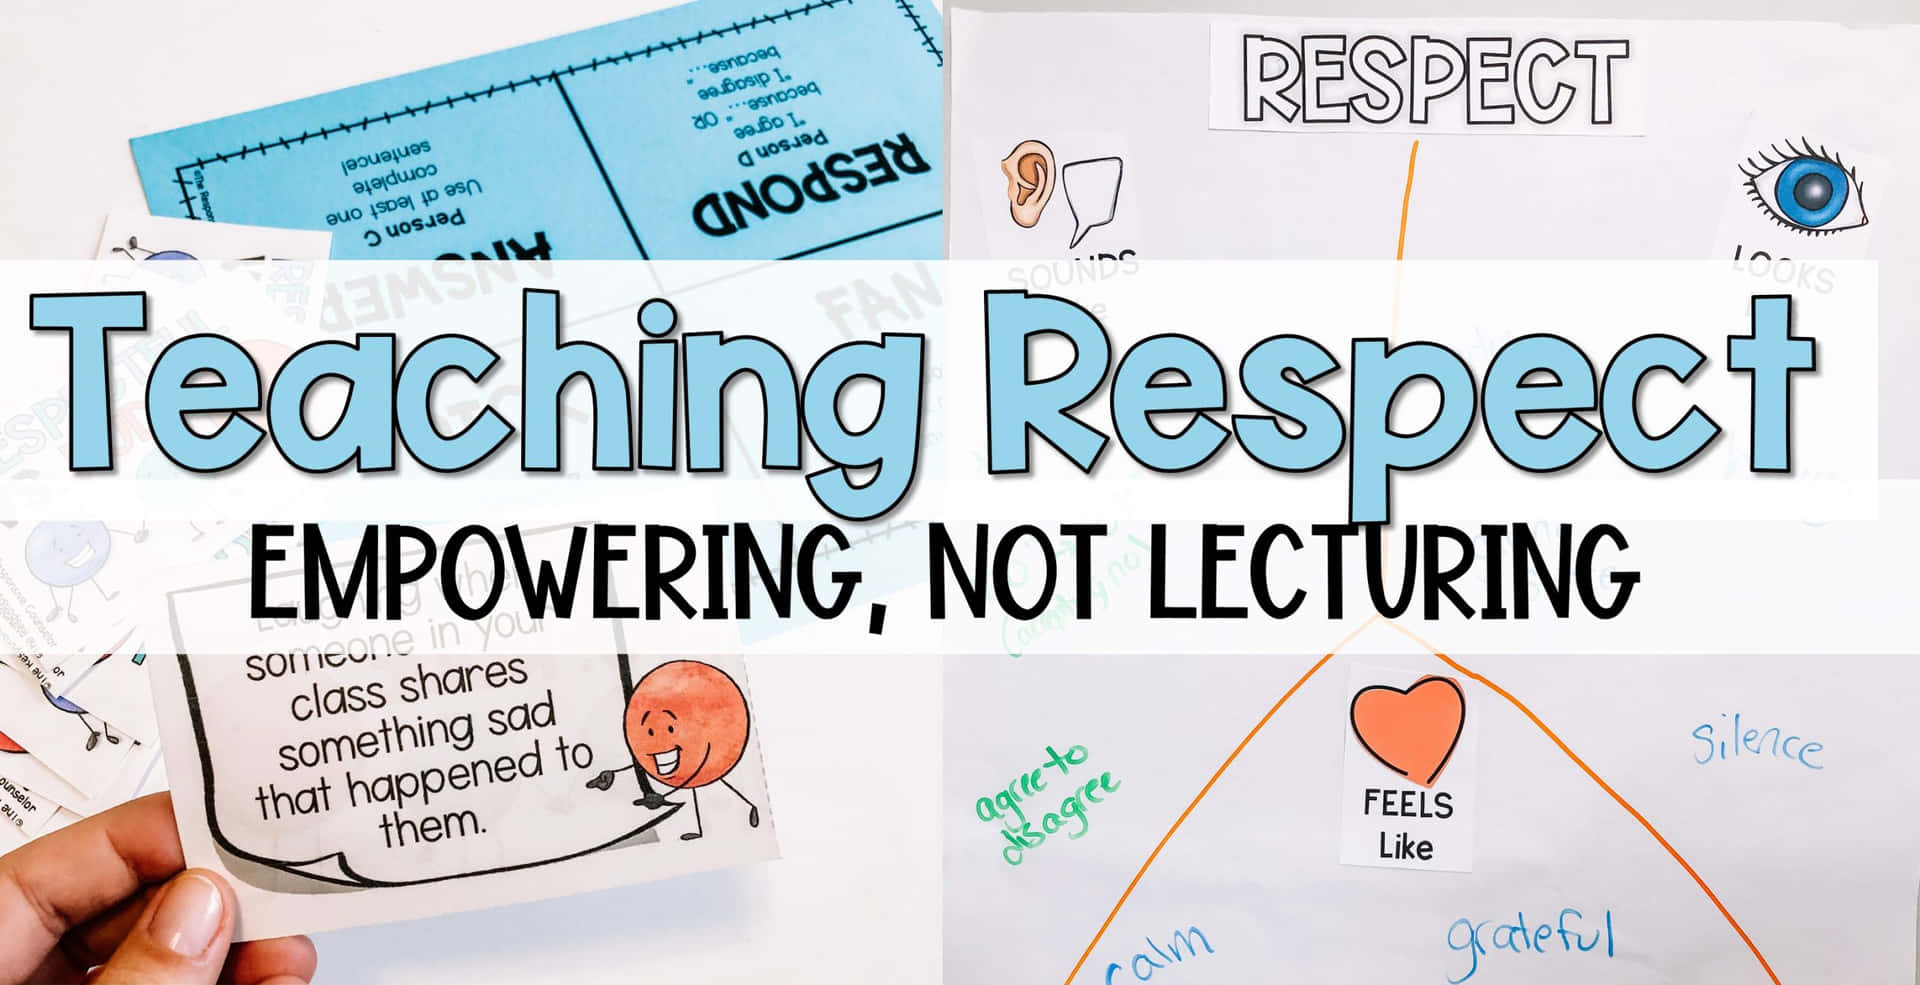 Teaching Respect Empowering, Not Lecturing